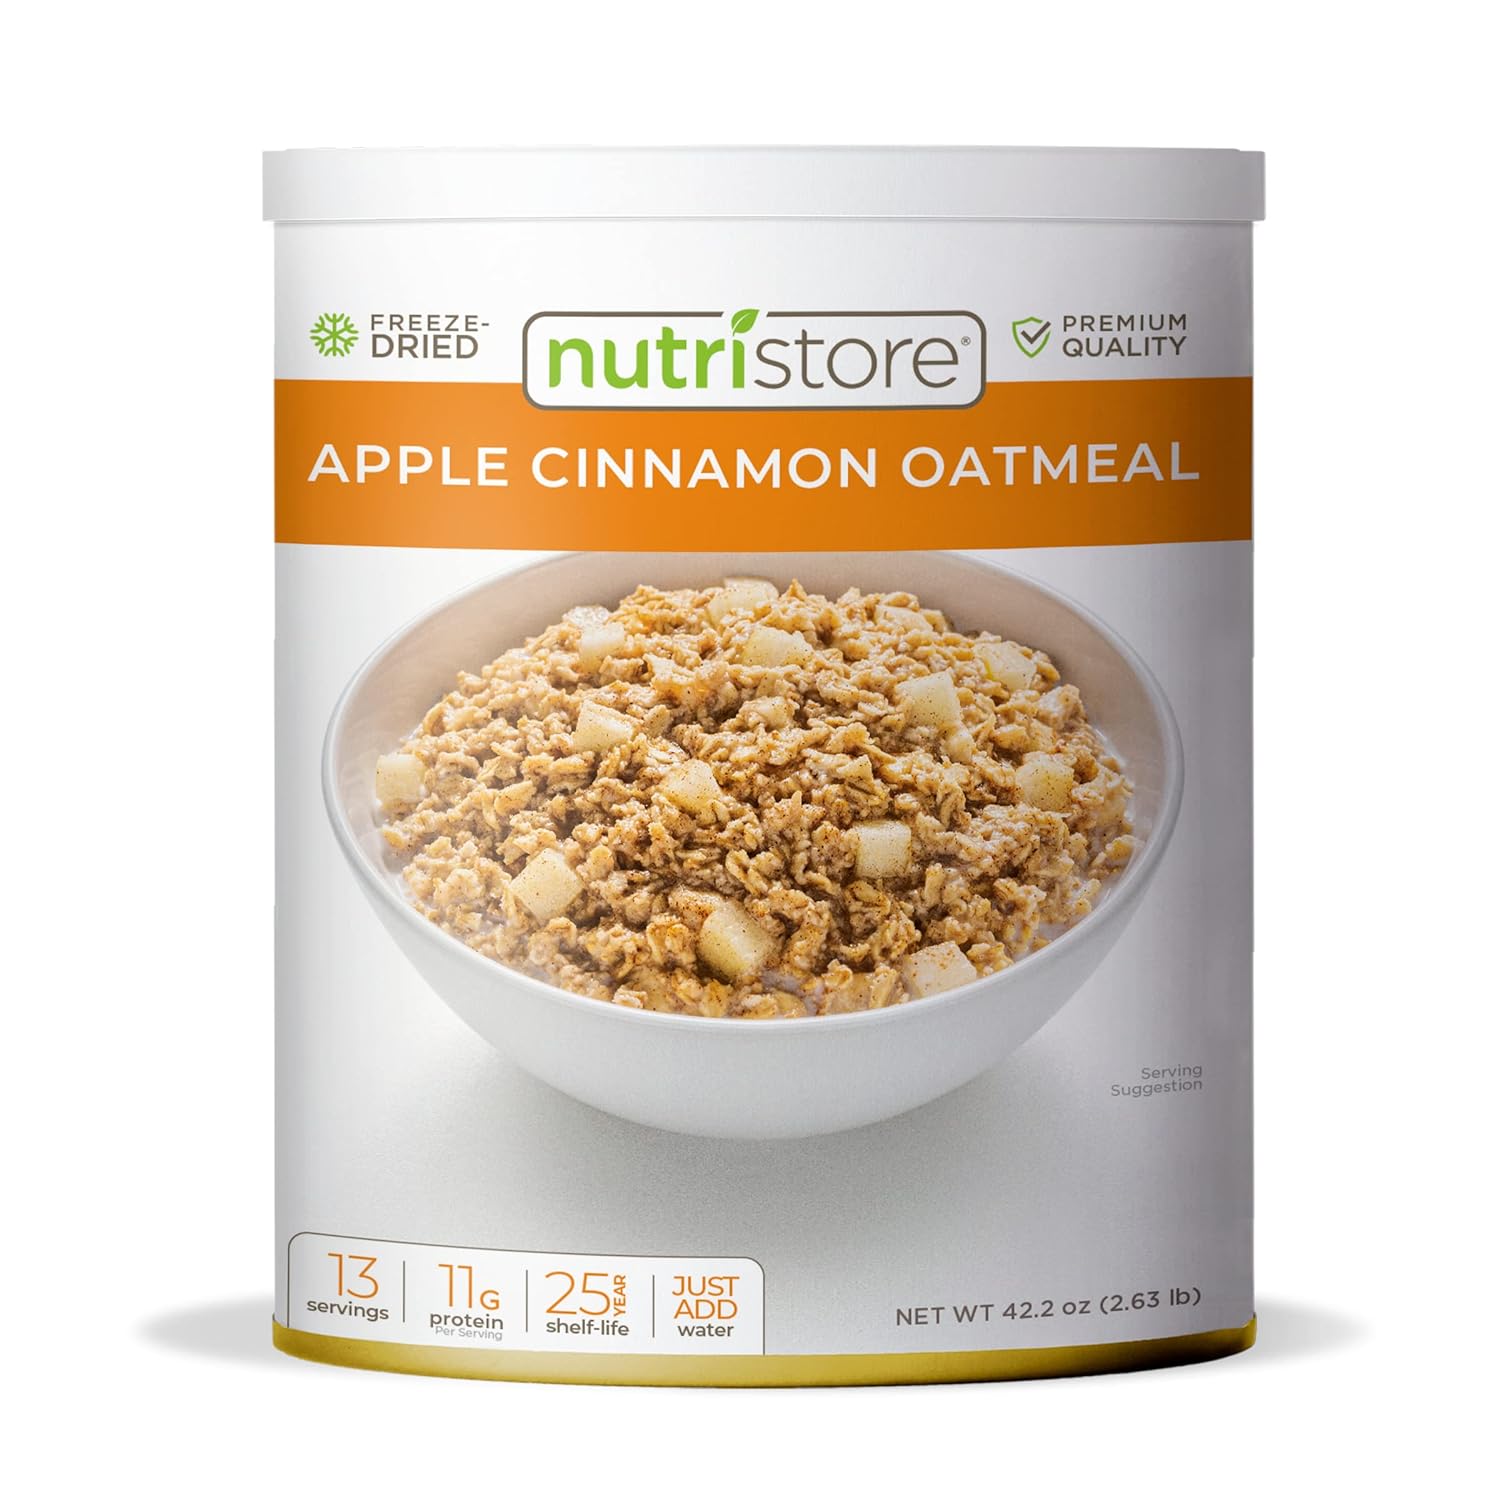 Nutristore Freeze-Dried Apple Cinnamon Oatmeal | Emergency Survival Bulk Food Storage Meal | Perfect for Everyday Quick Meals or Long-Term Storage | 25 Year Shelf Life | USDA Inspected (1-Pack)